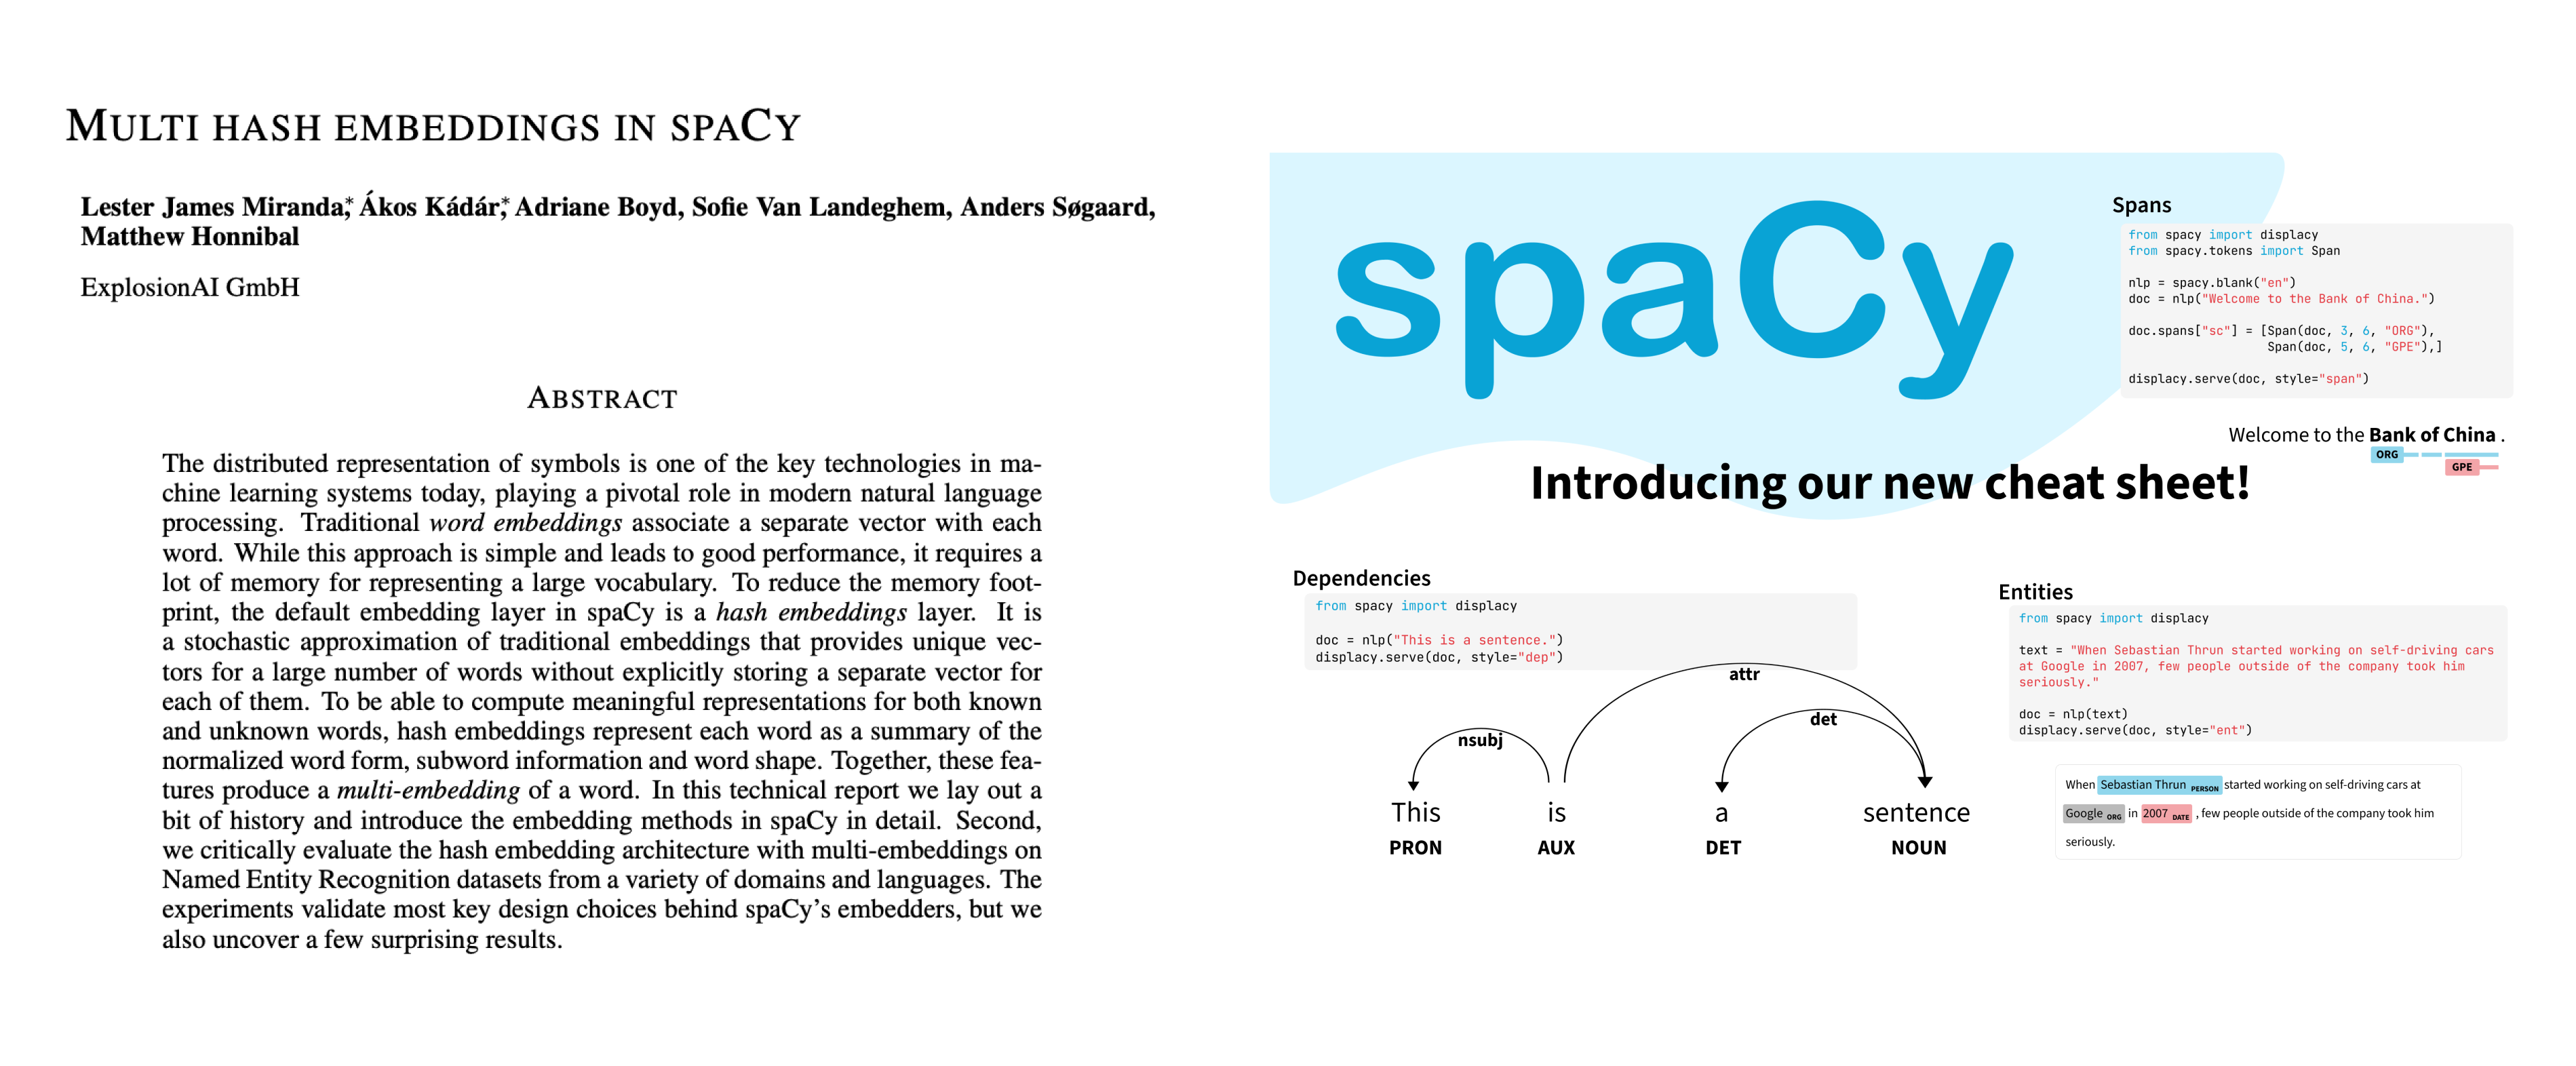 Multihash embeddings in spaCy paper and spaCy cheat sheet